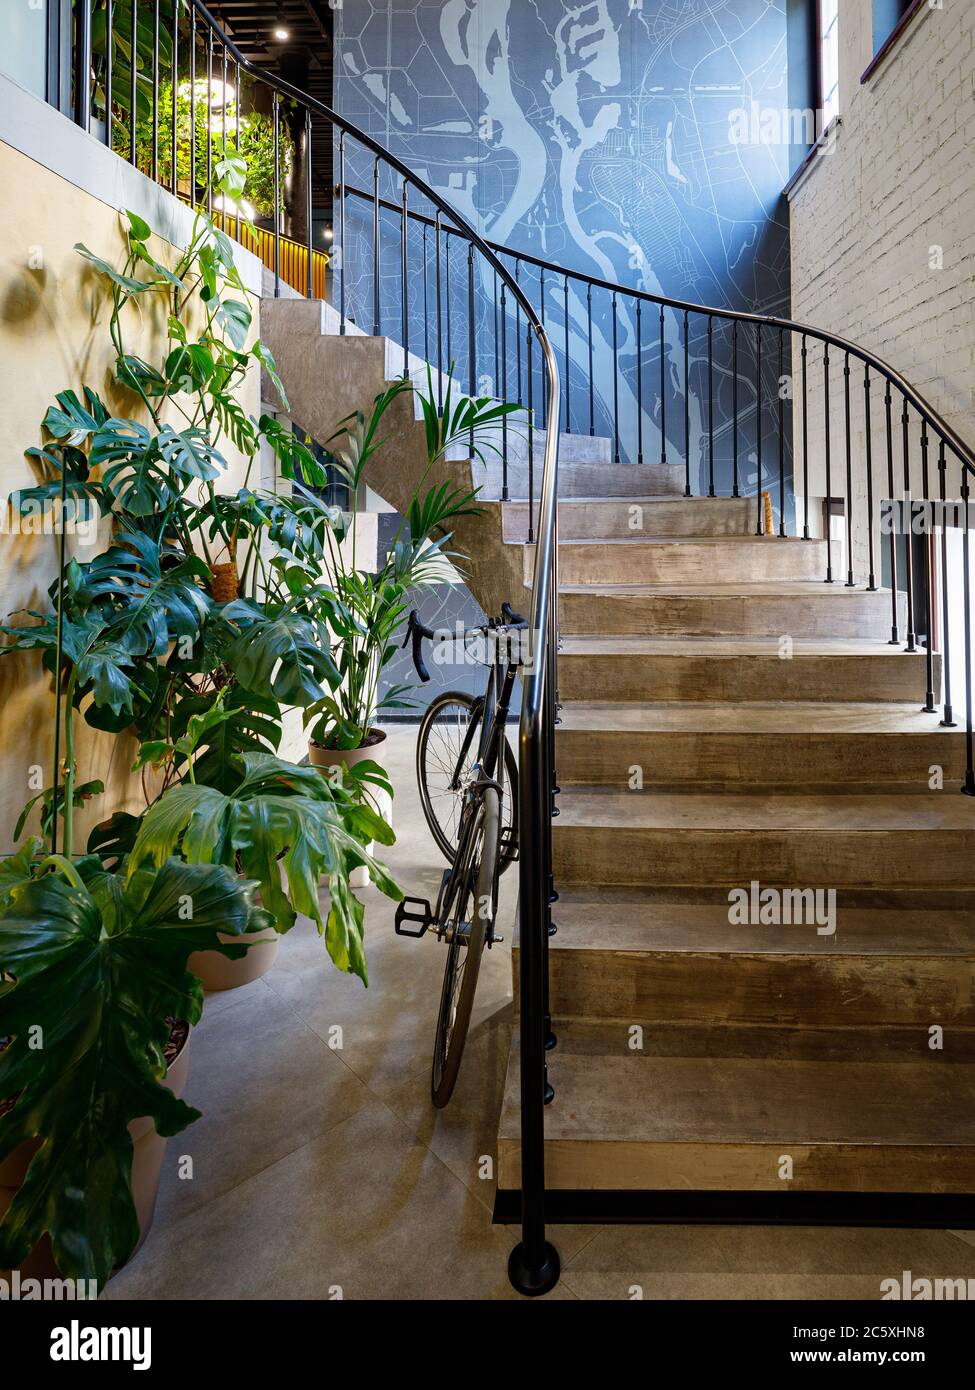 Aestetic indoor interior with upstairs biclycle and plants Stock Photo